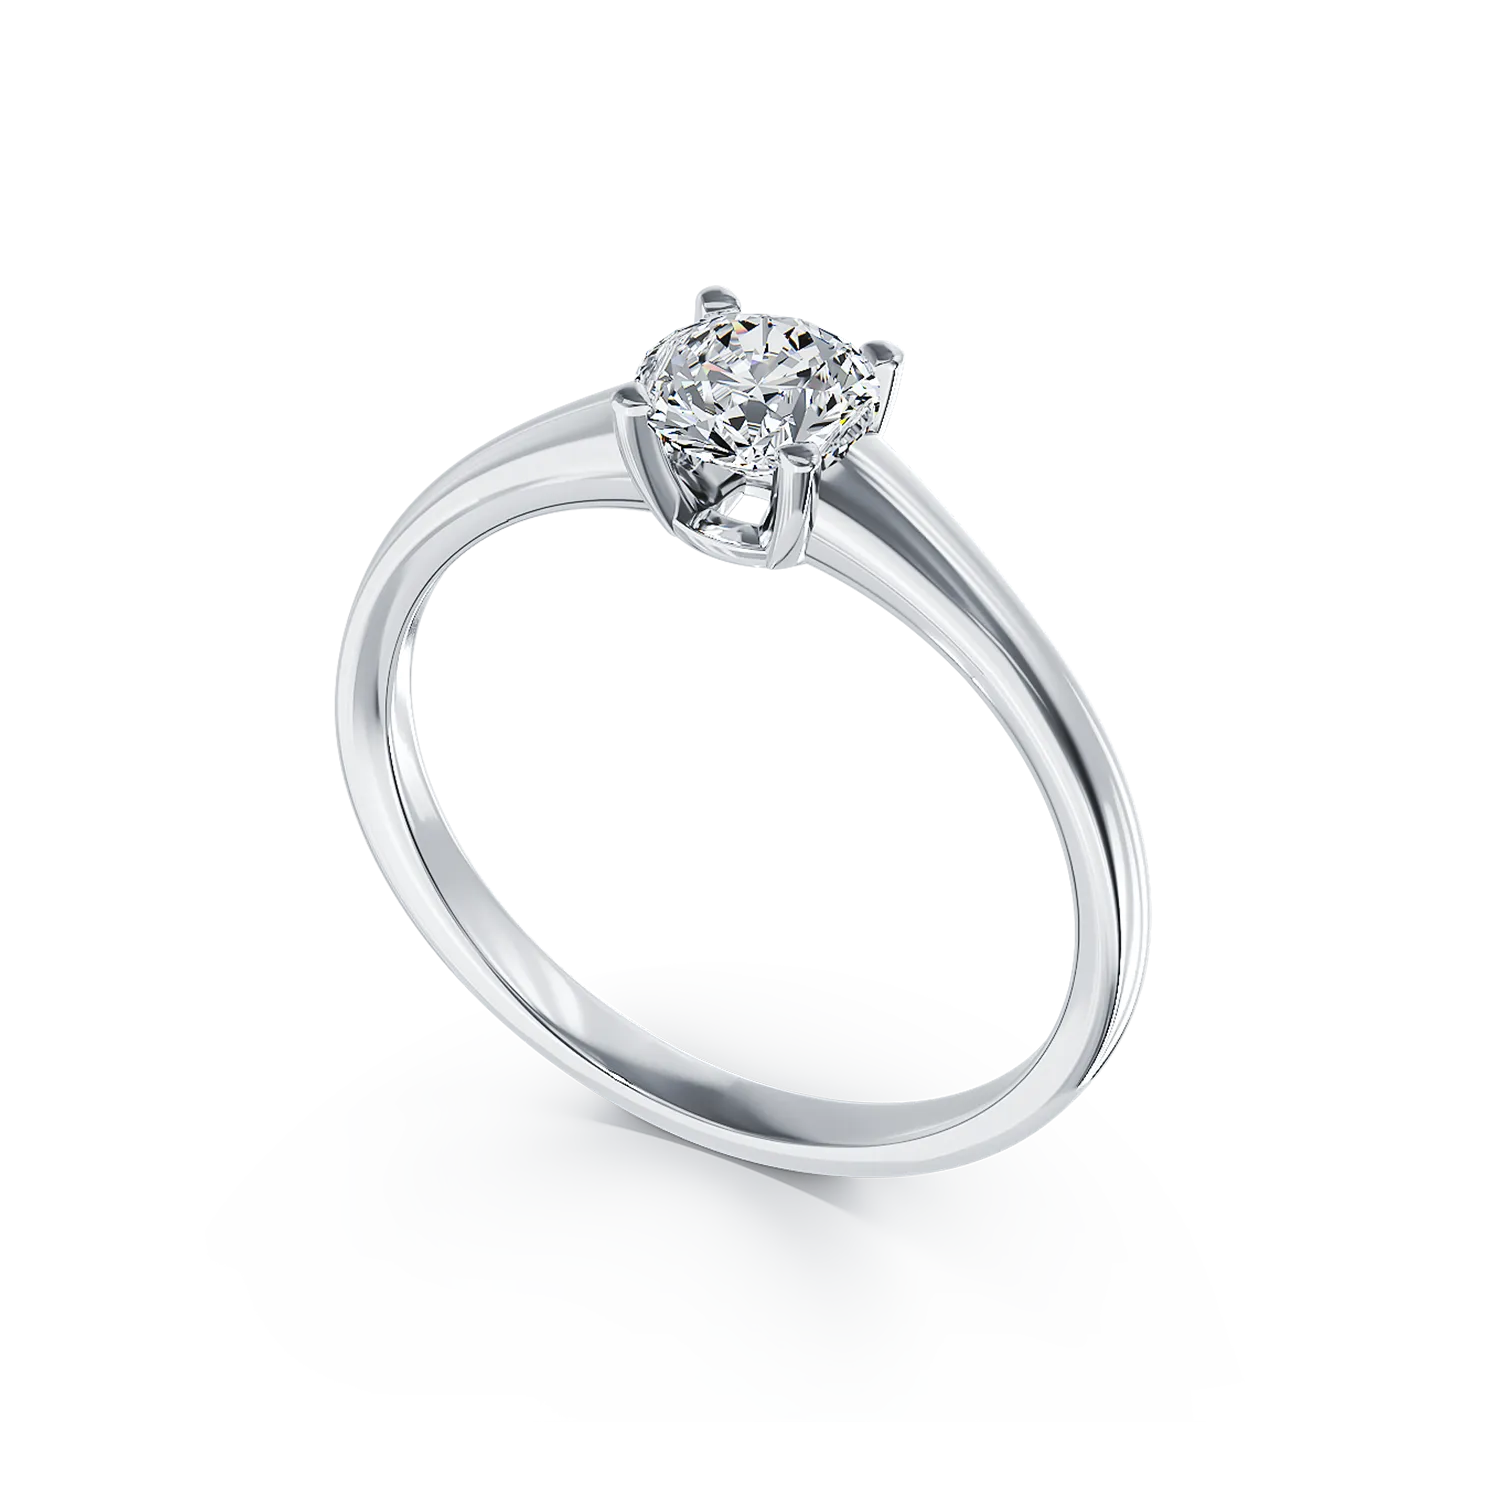 18k white gold engagement ring with a 0.5ct diamond